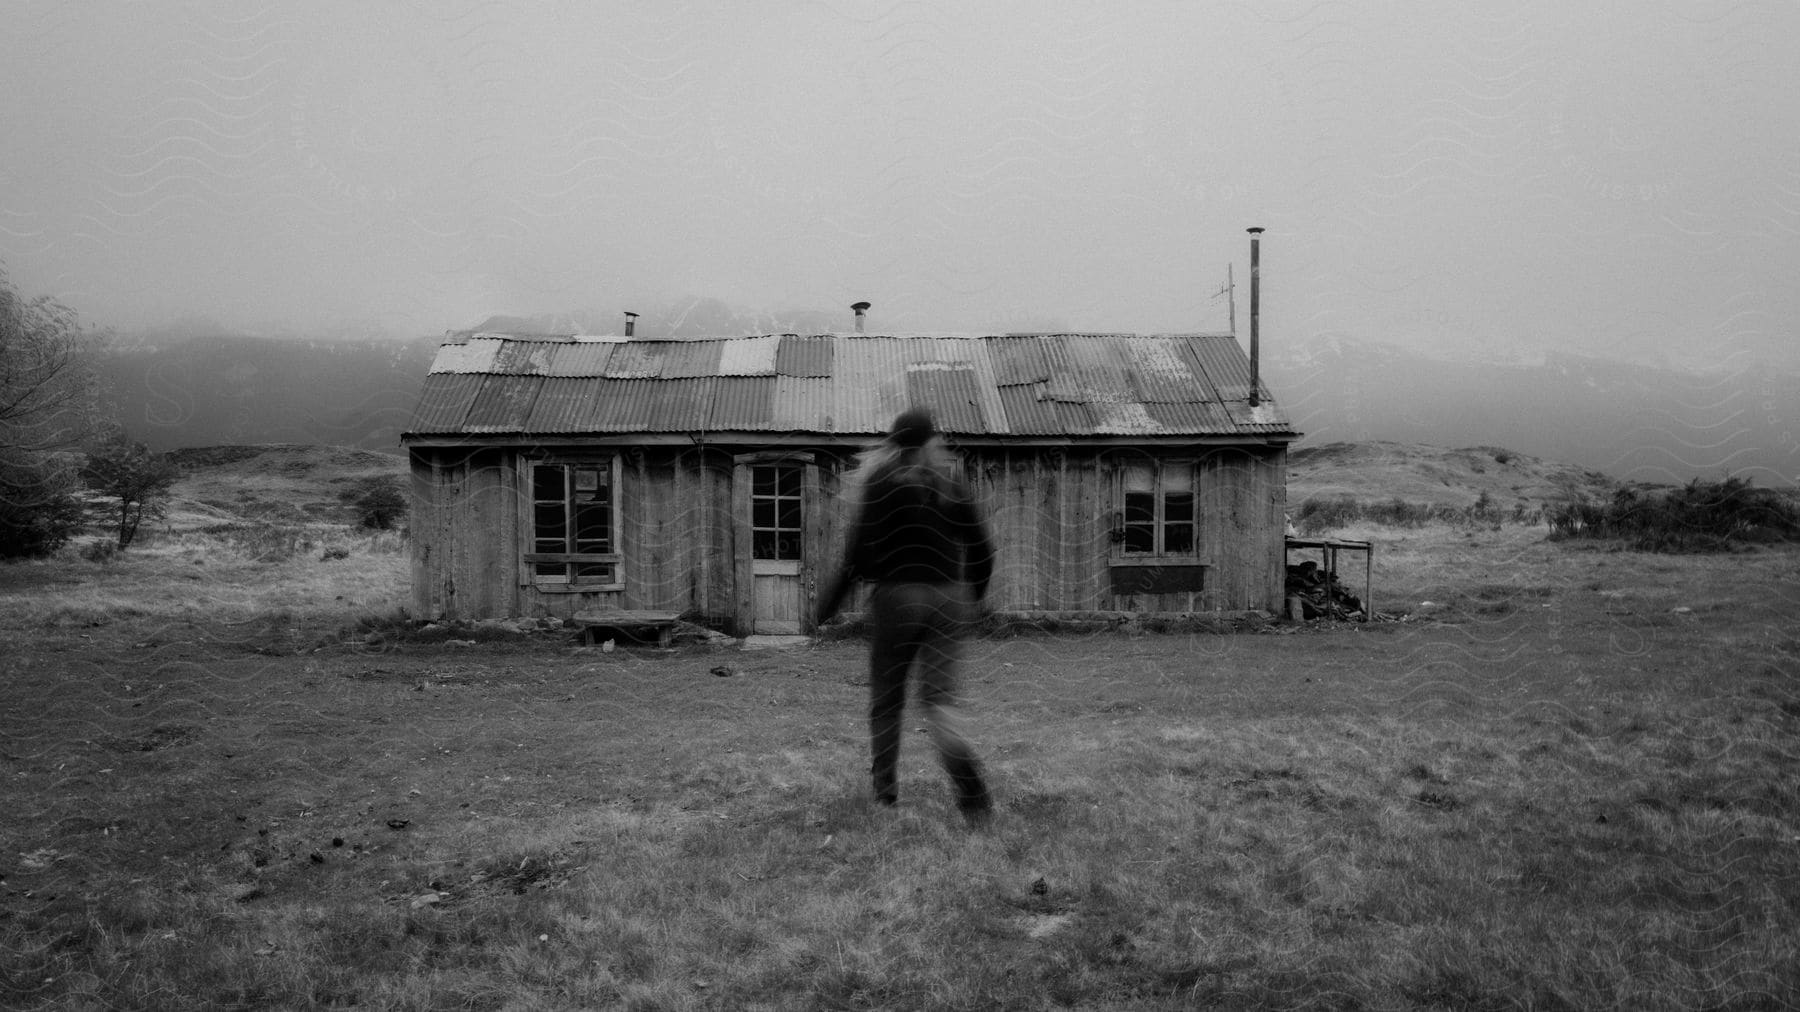 A person in a rural hut in the countryside